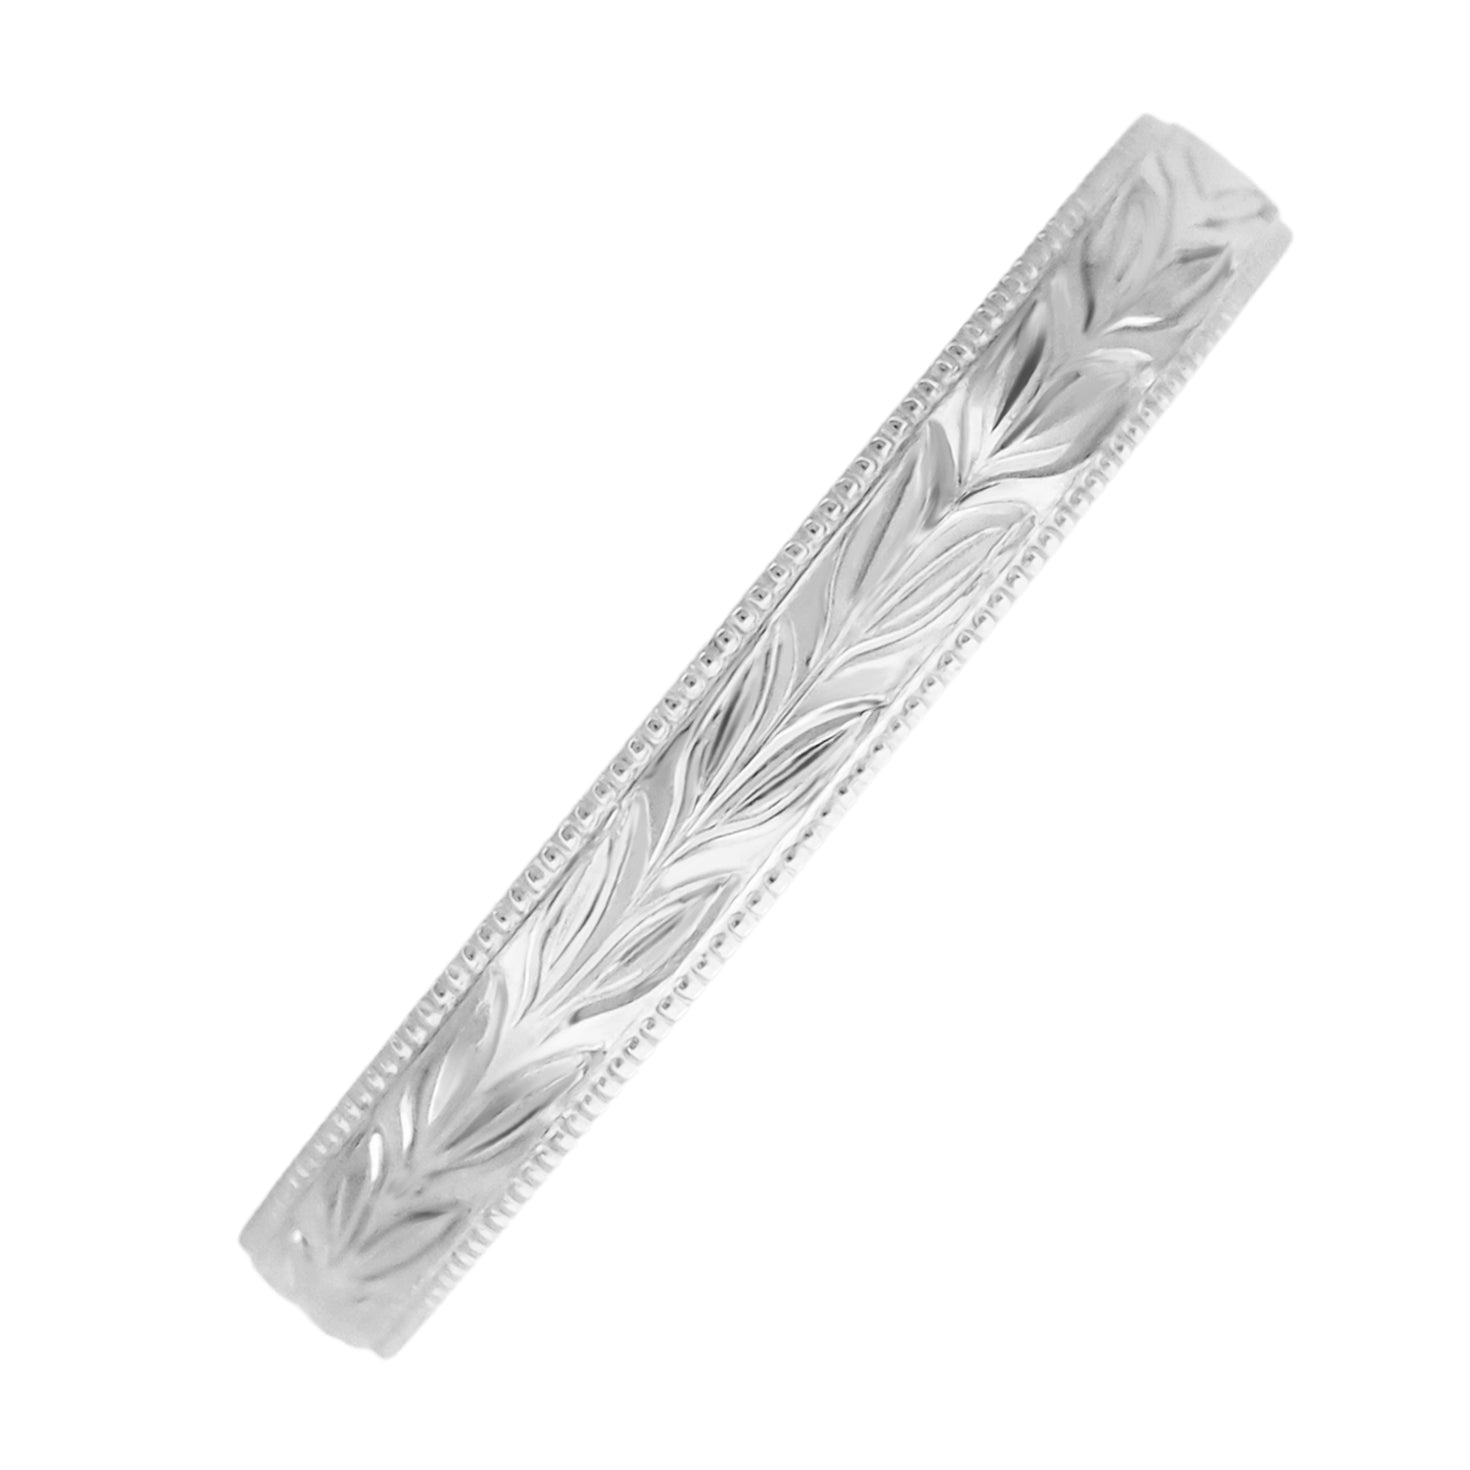 Art Deco Hand Carved Hawaiian Maile Leaves Wedding Band in White Gold - 14K or 18K - Item: R719 - Image: 4